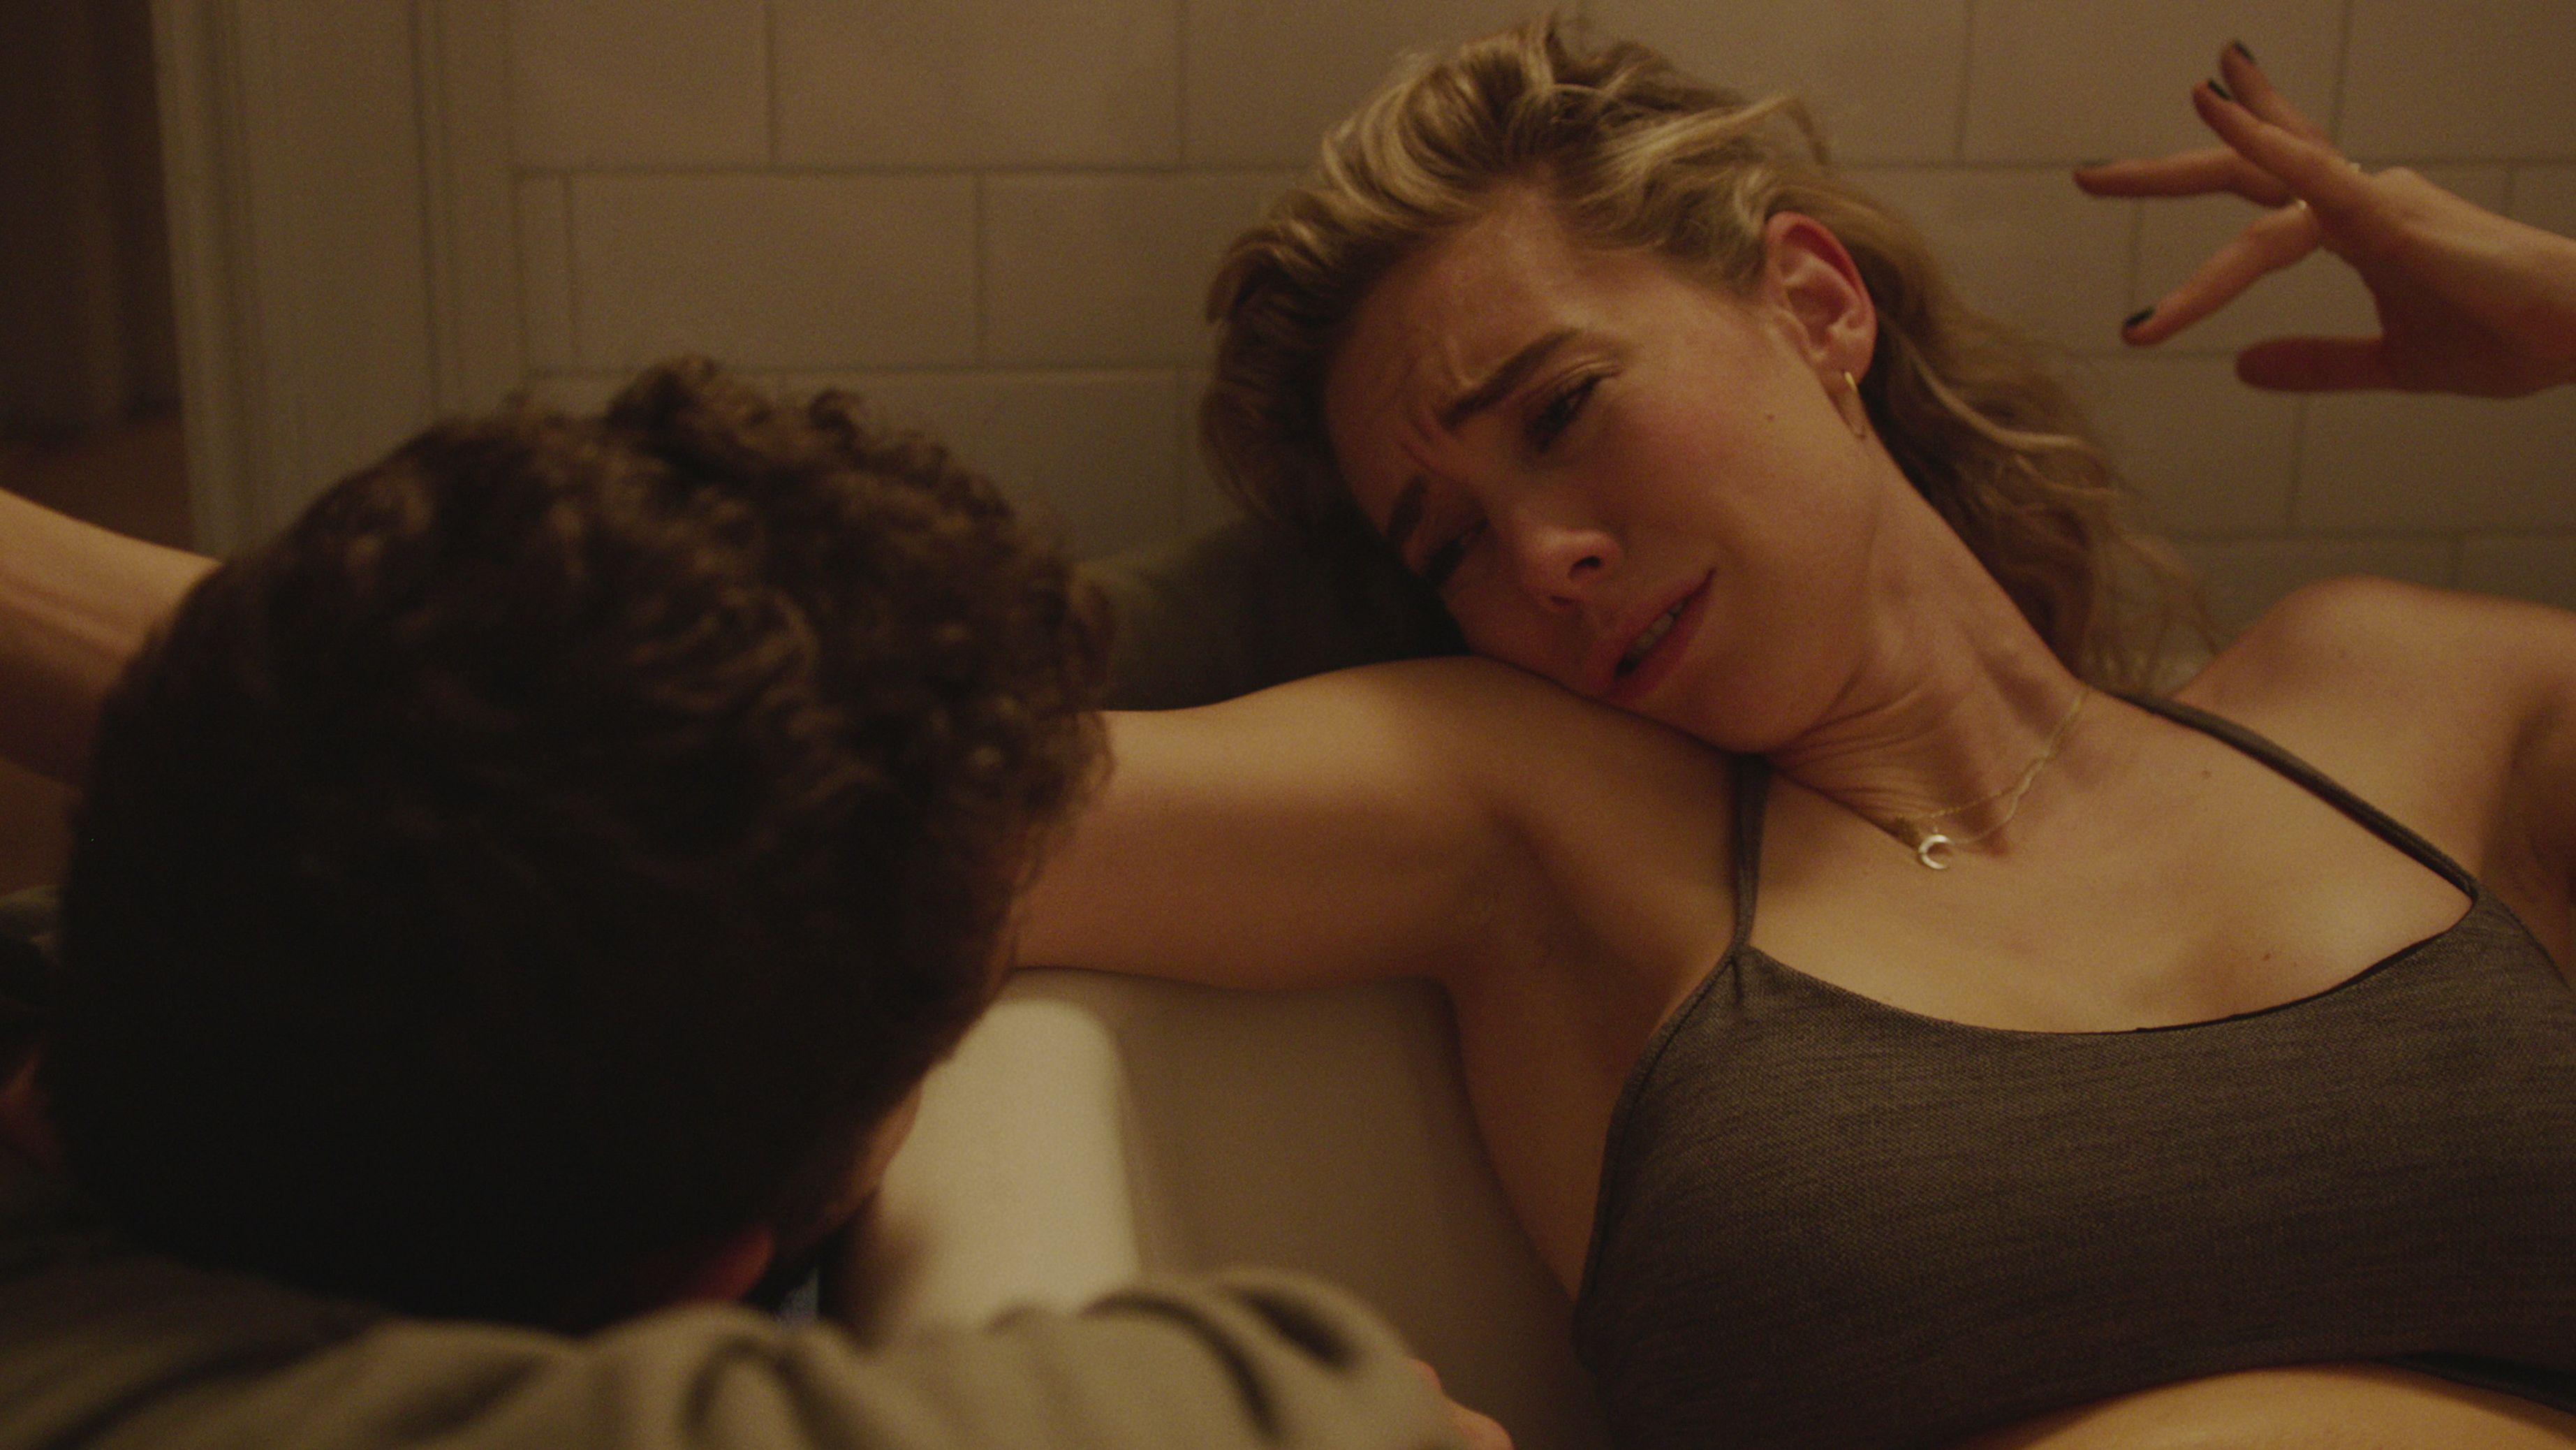 Shia LaBeouf and Vanessa Kirby in 'Pieces of a Woman' (Benjamin Loeb/Netflix).